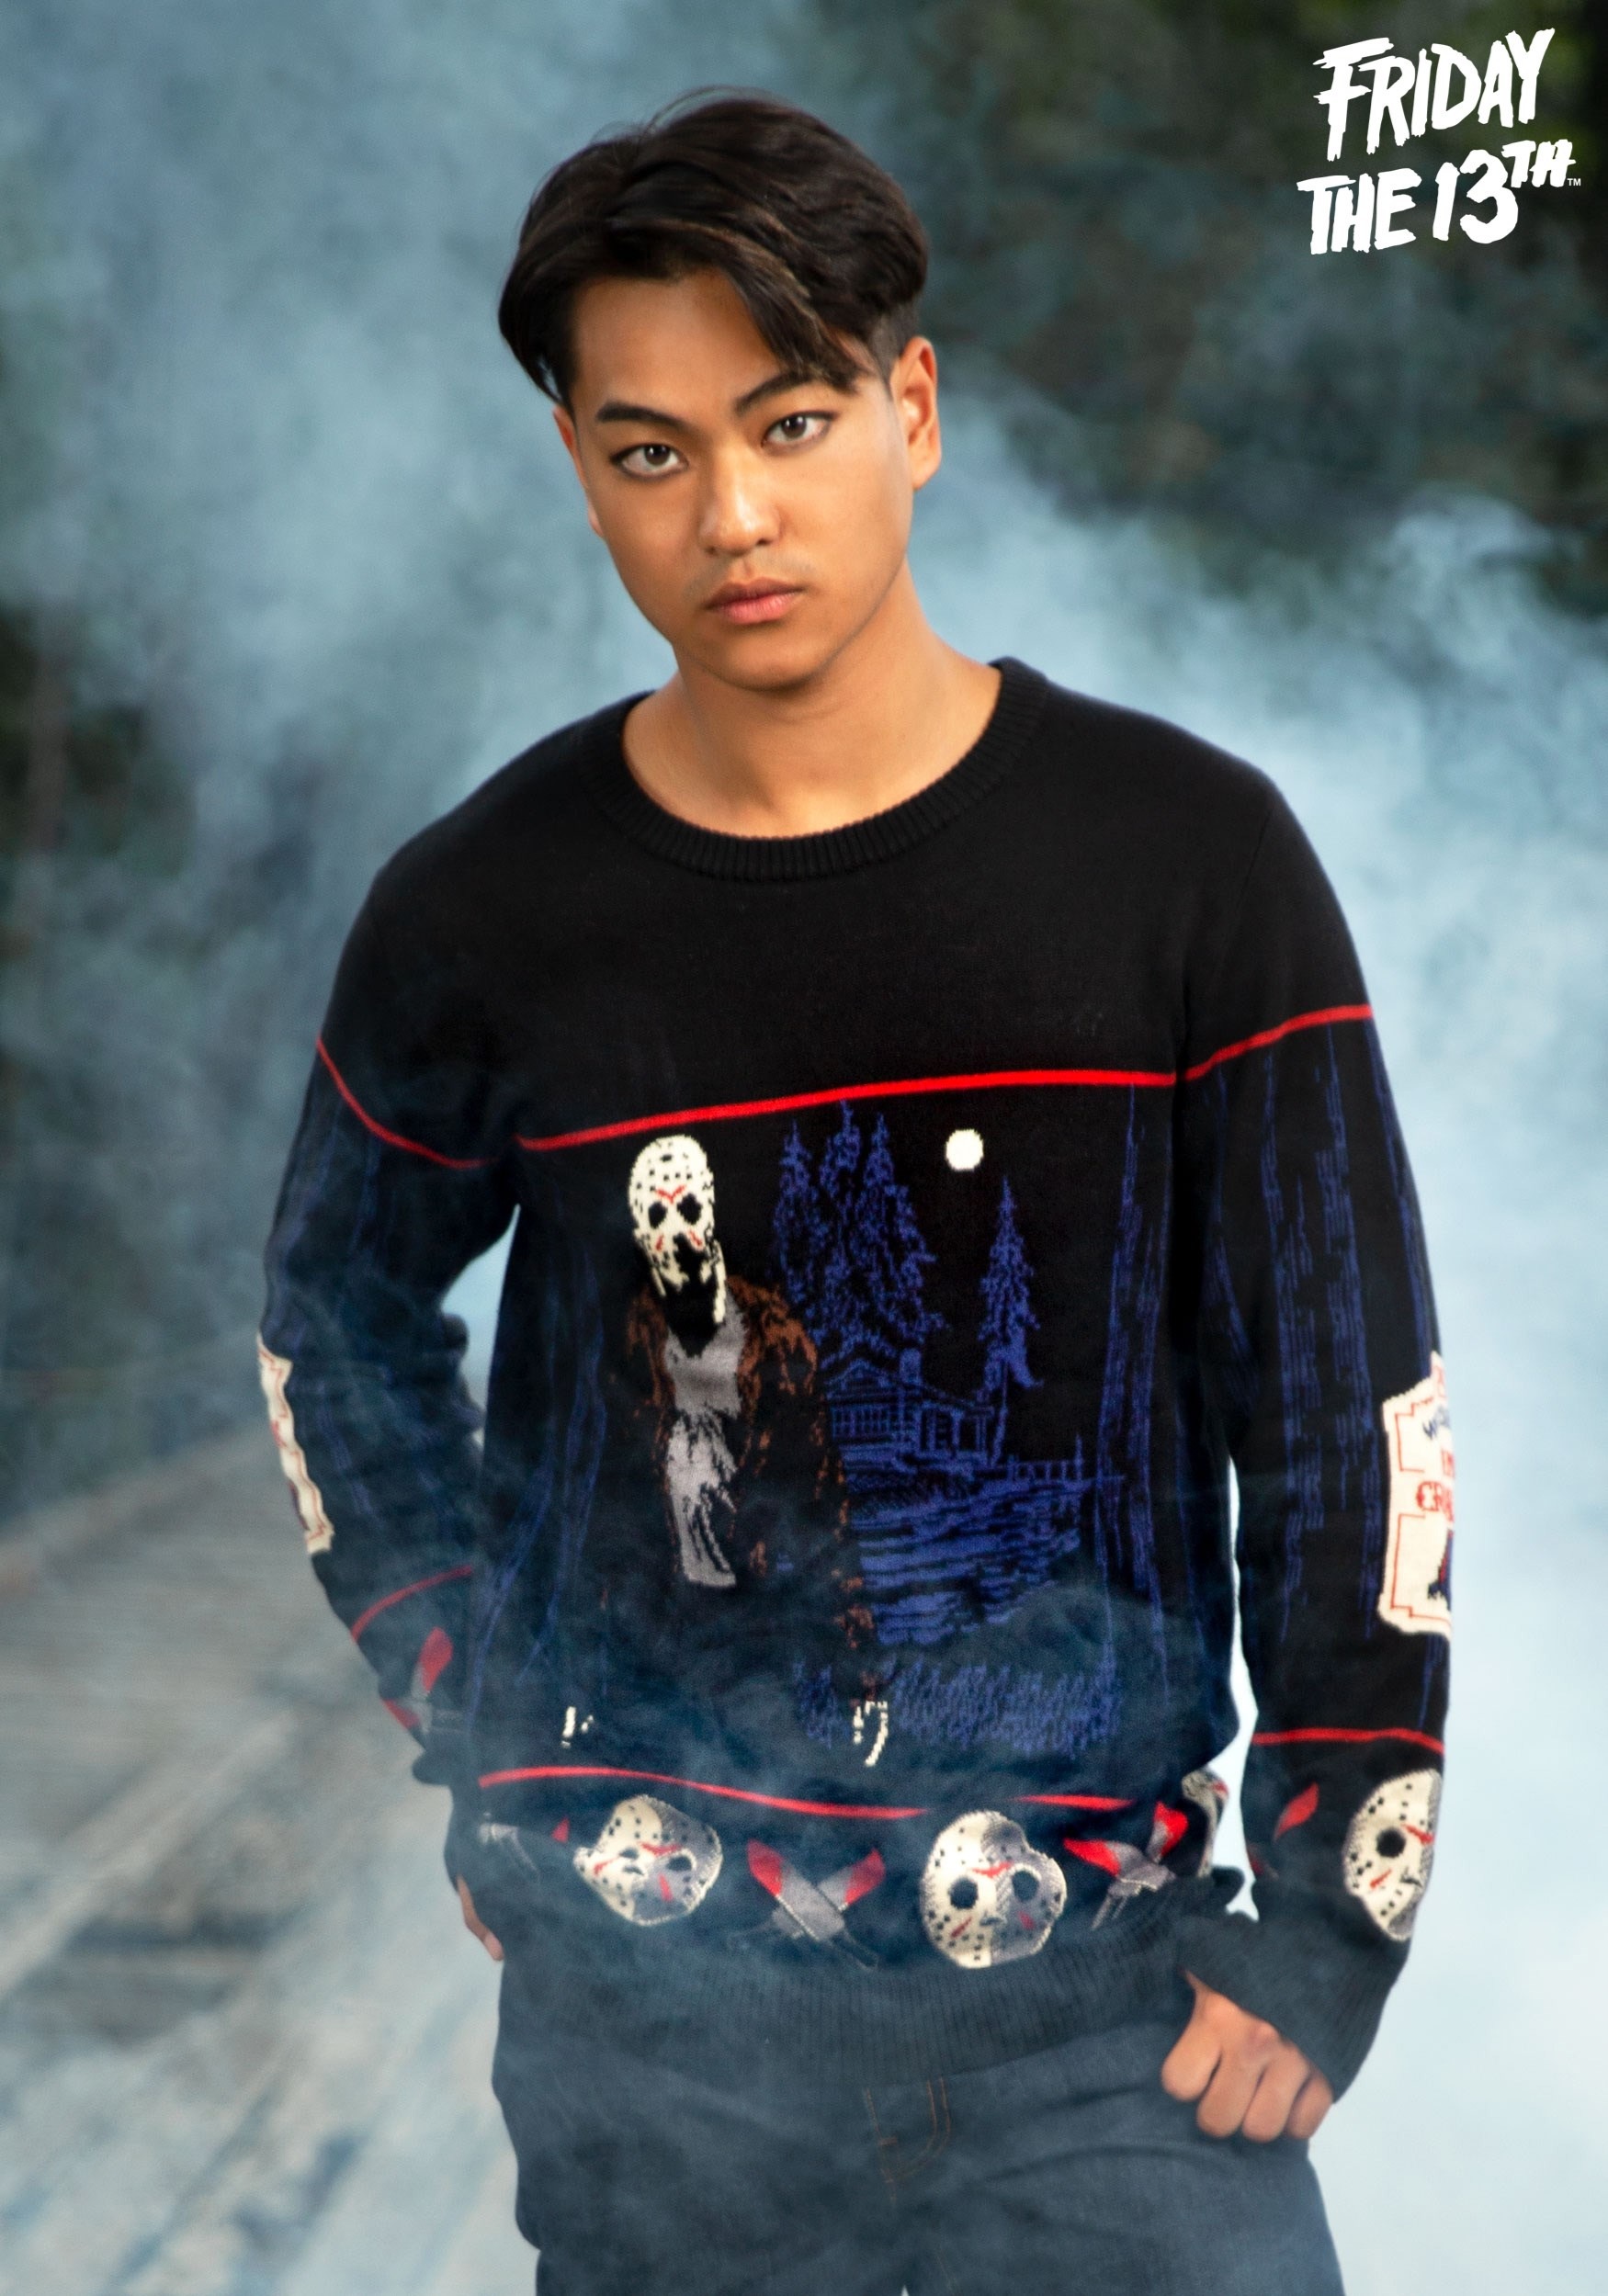 Friday the 13th Camp Crystal Lake Halloween Sweater